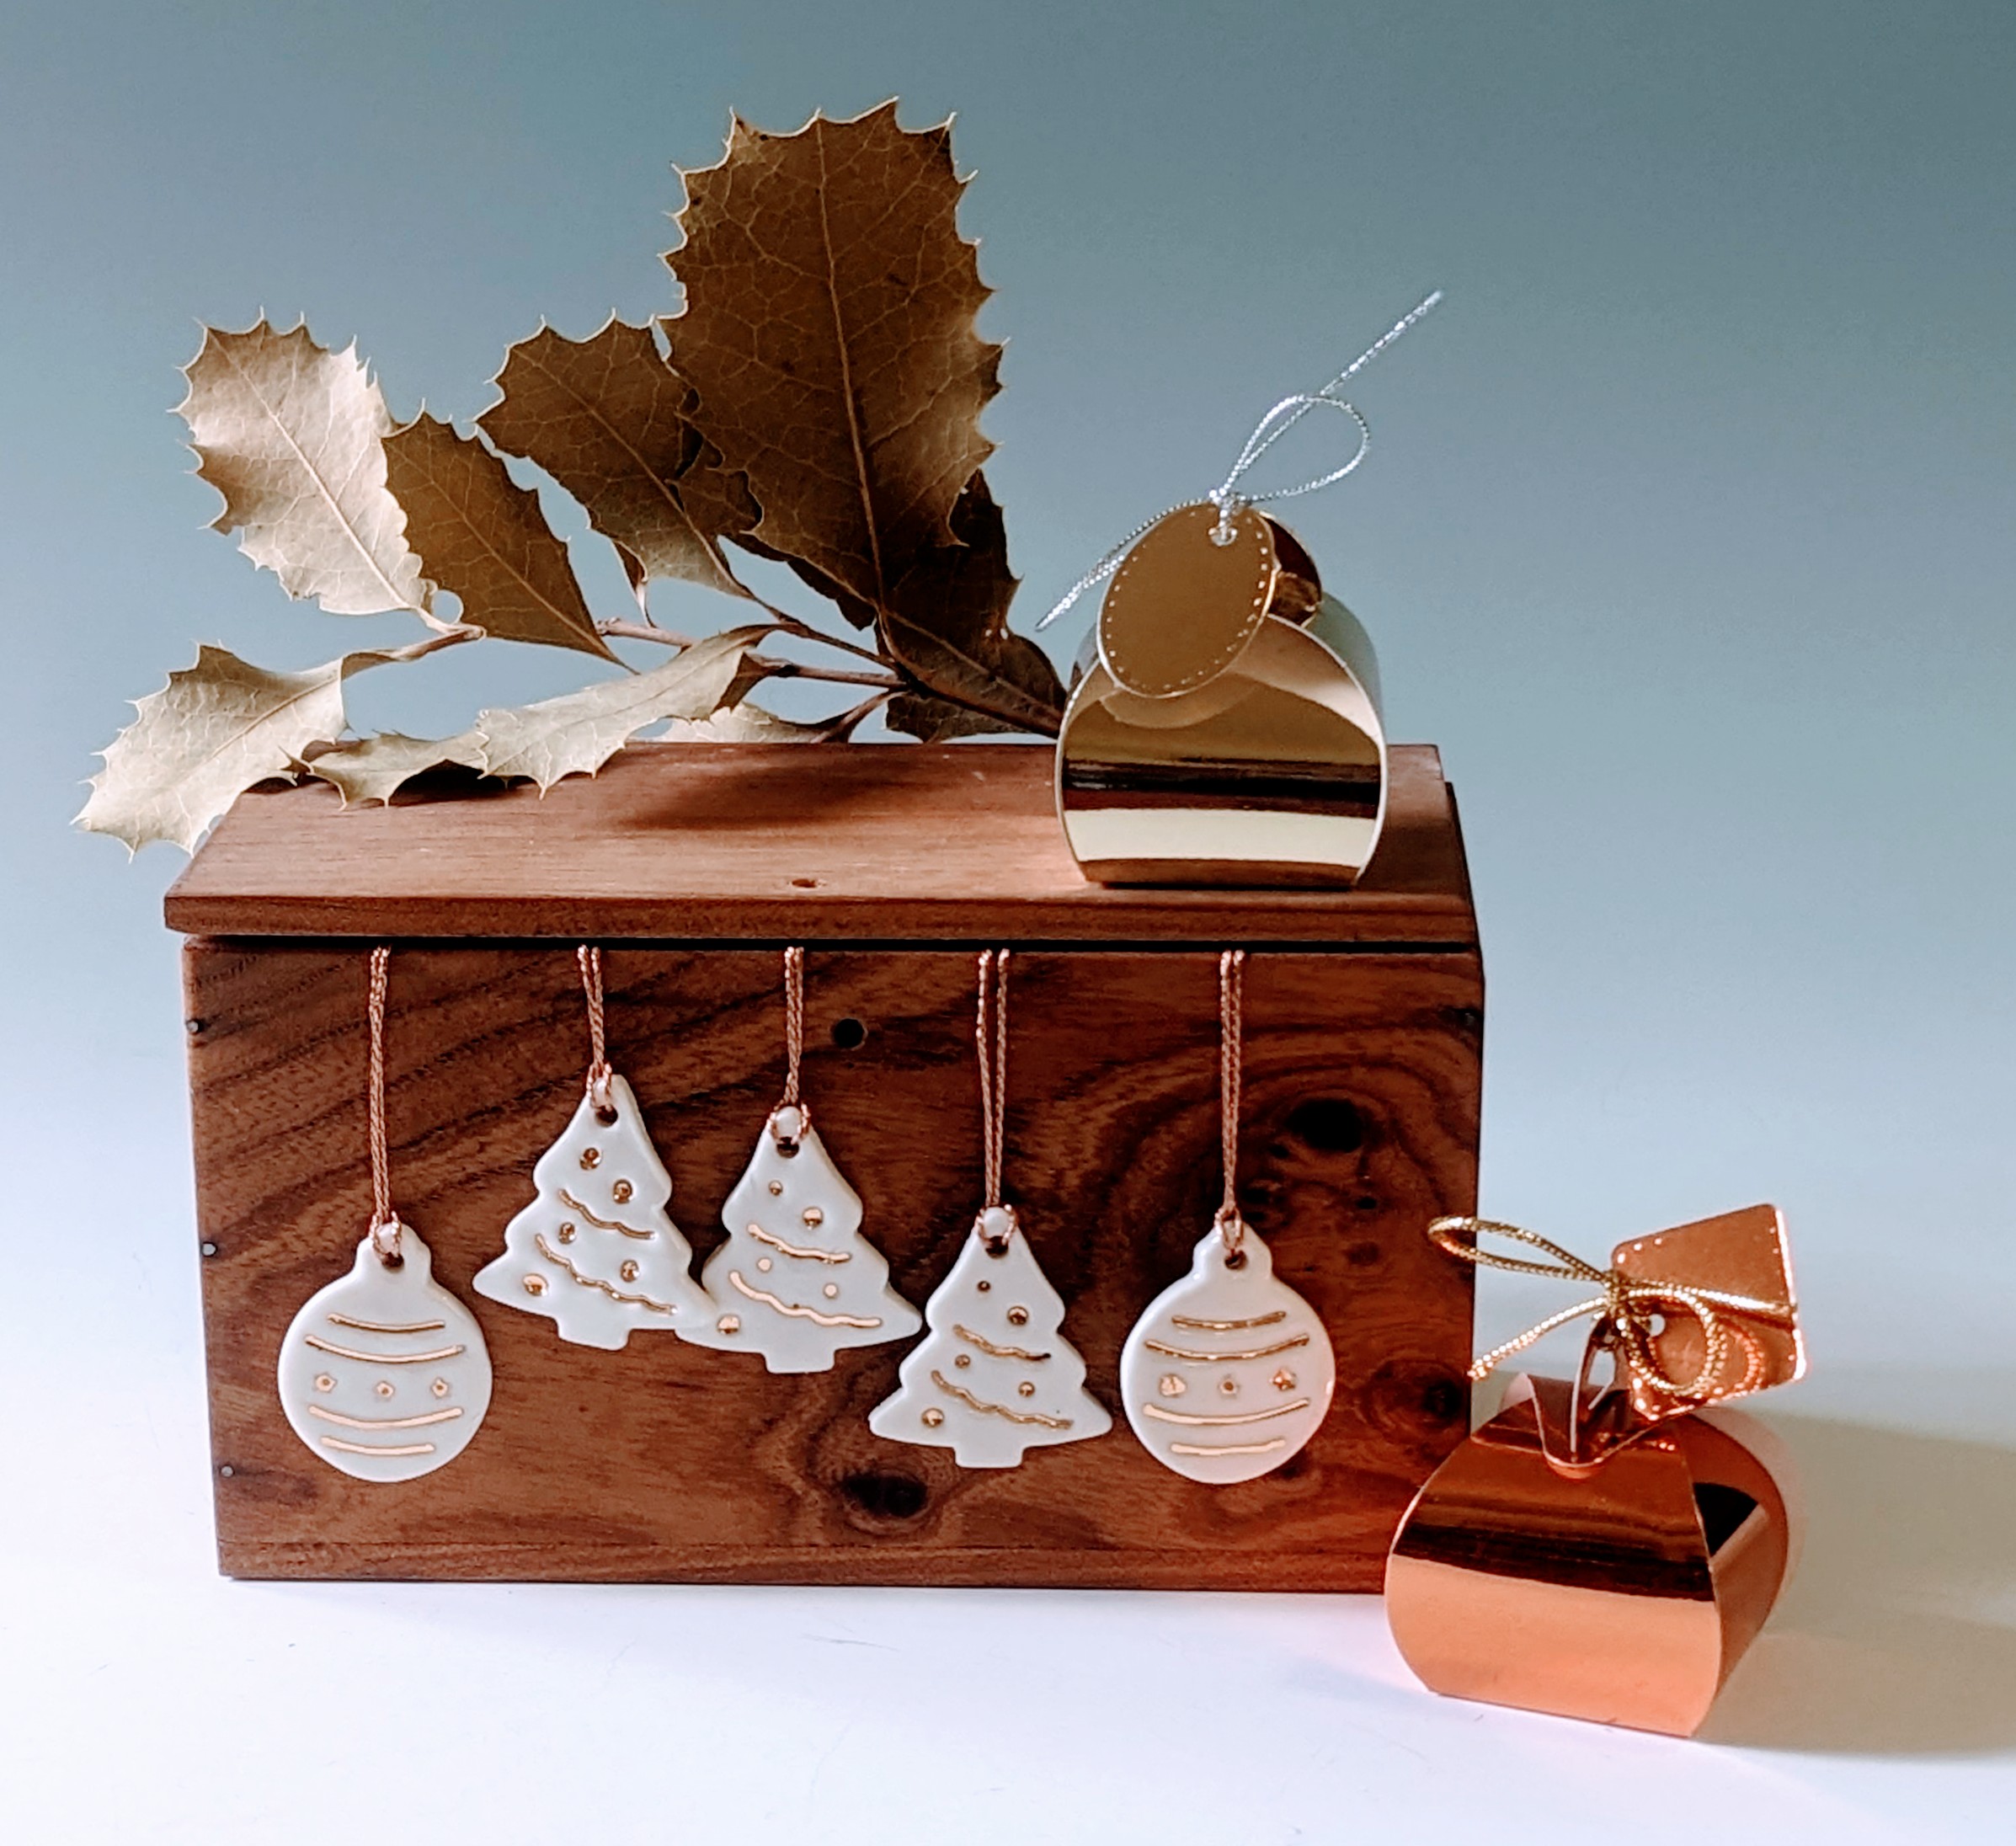 ceramic Christmas decorations on a wooden display